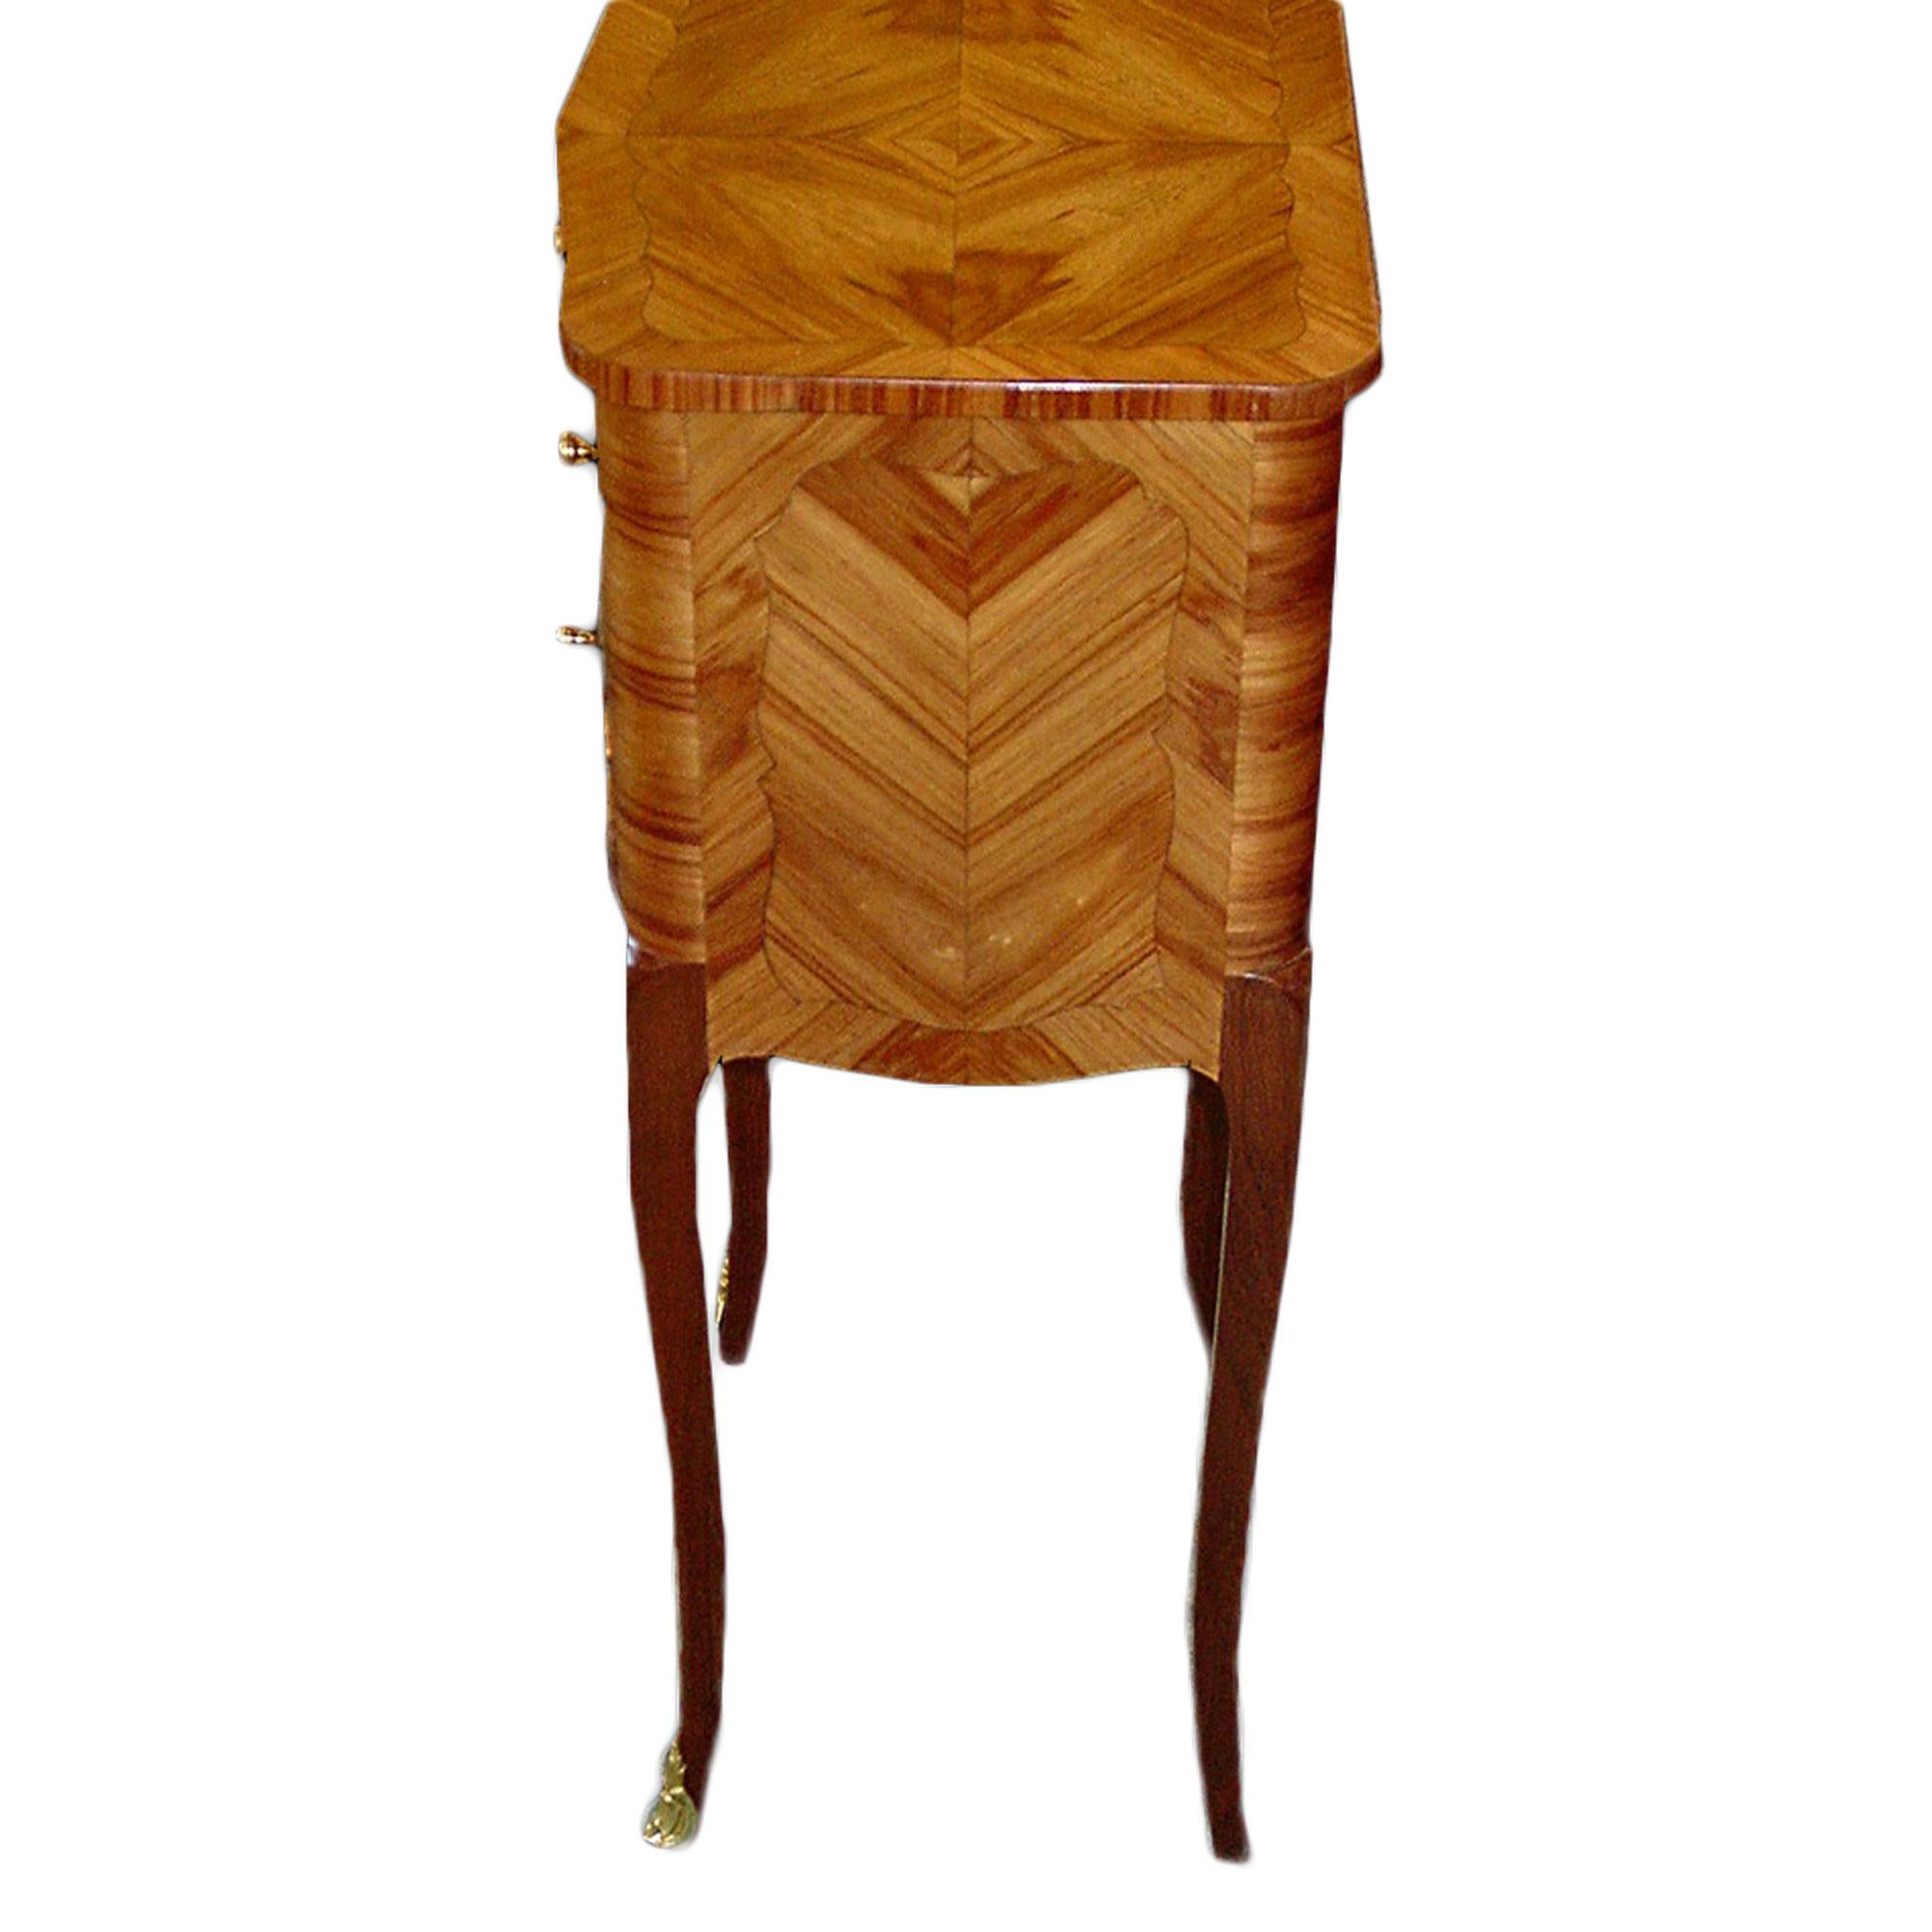 A charming French 19th century Louis XV St. three drawer side table. The table in tulipwood has quarter veneered sides and top. The whole is raised on elegant slender cabriole legs decorated with ormolu sabots while the drawers have ormolu drawer